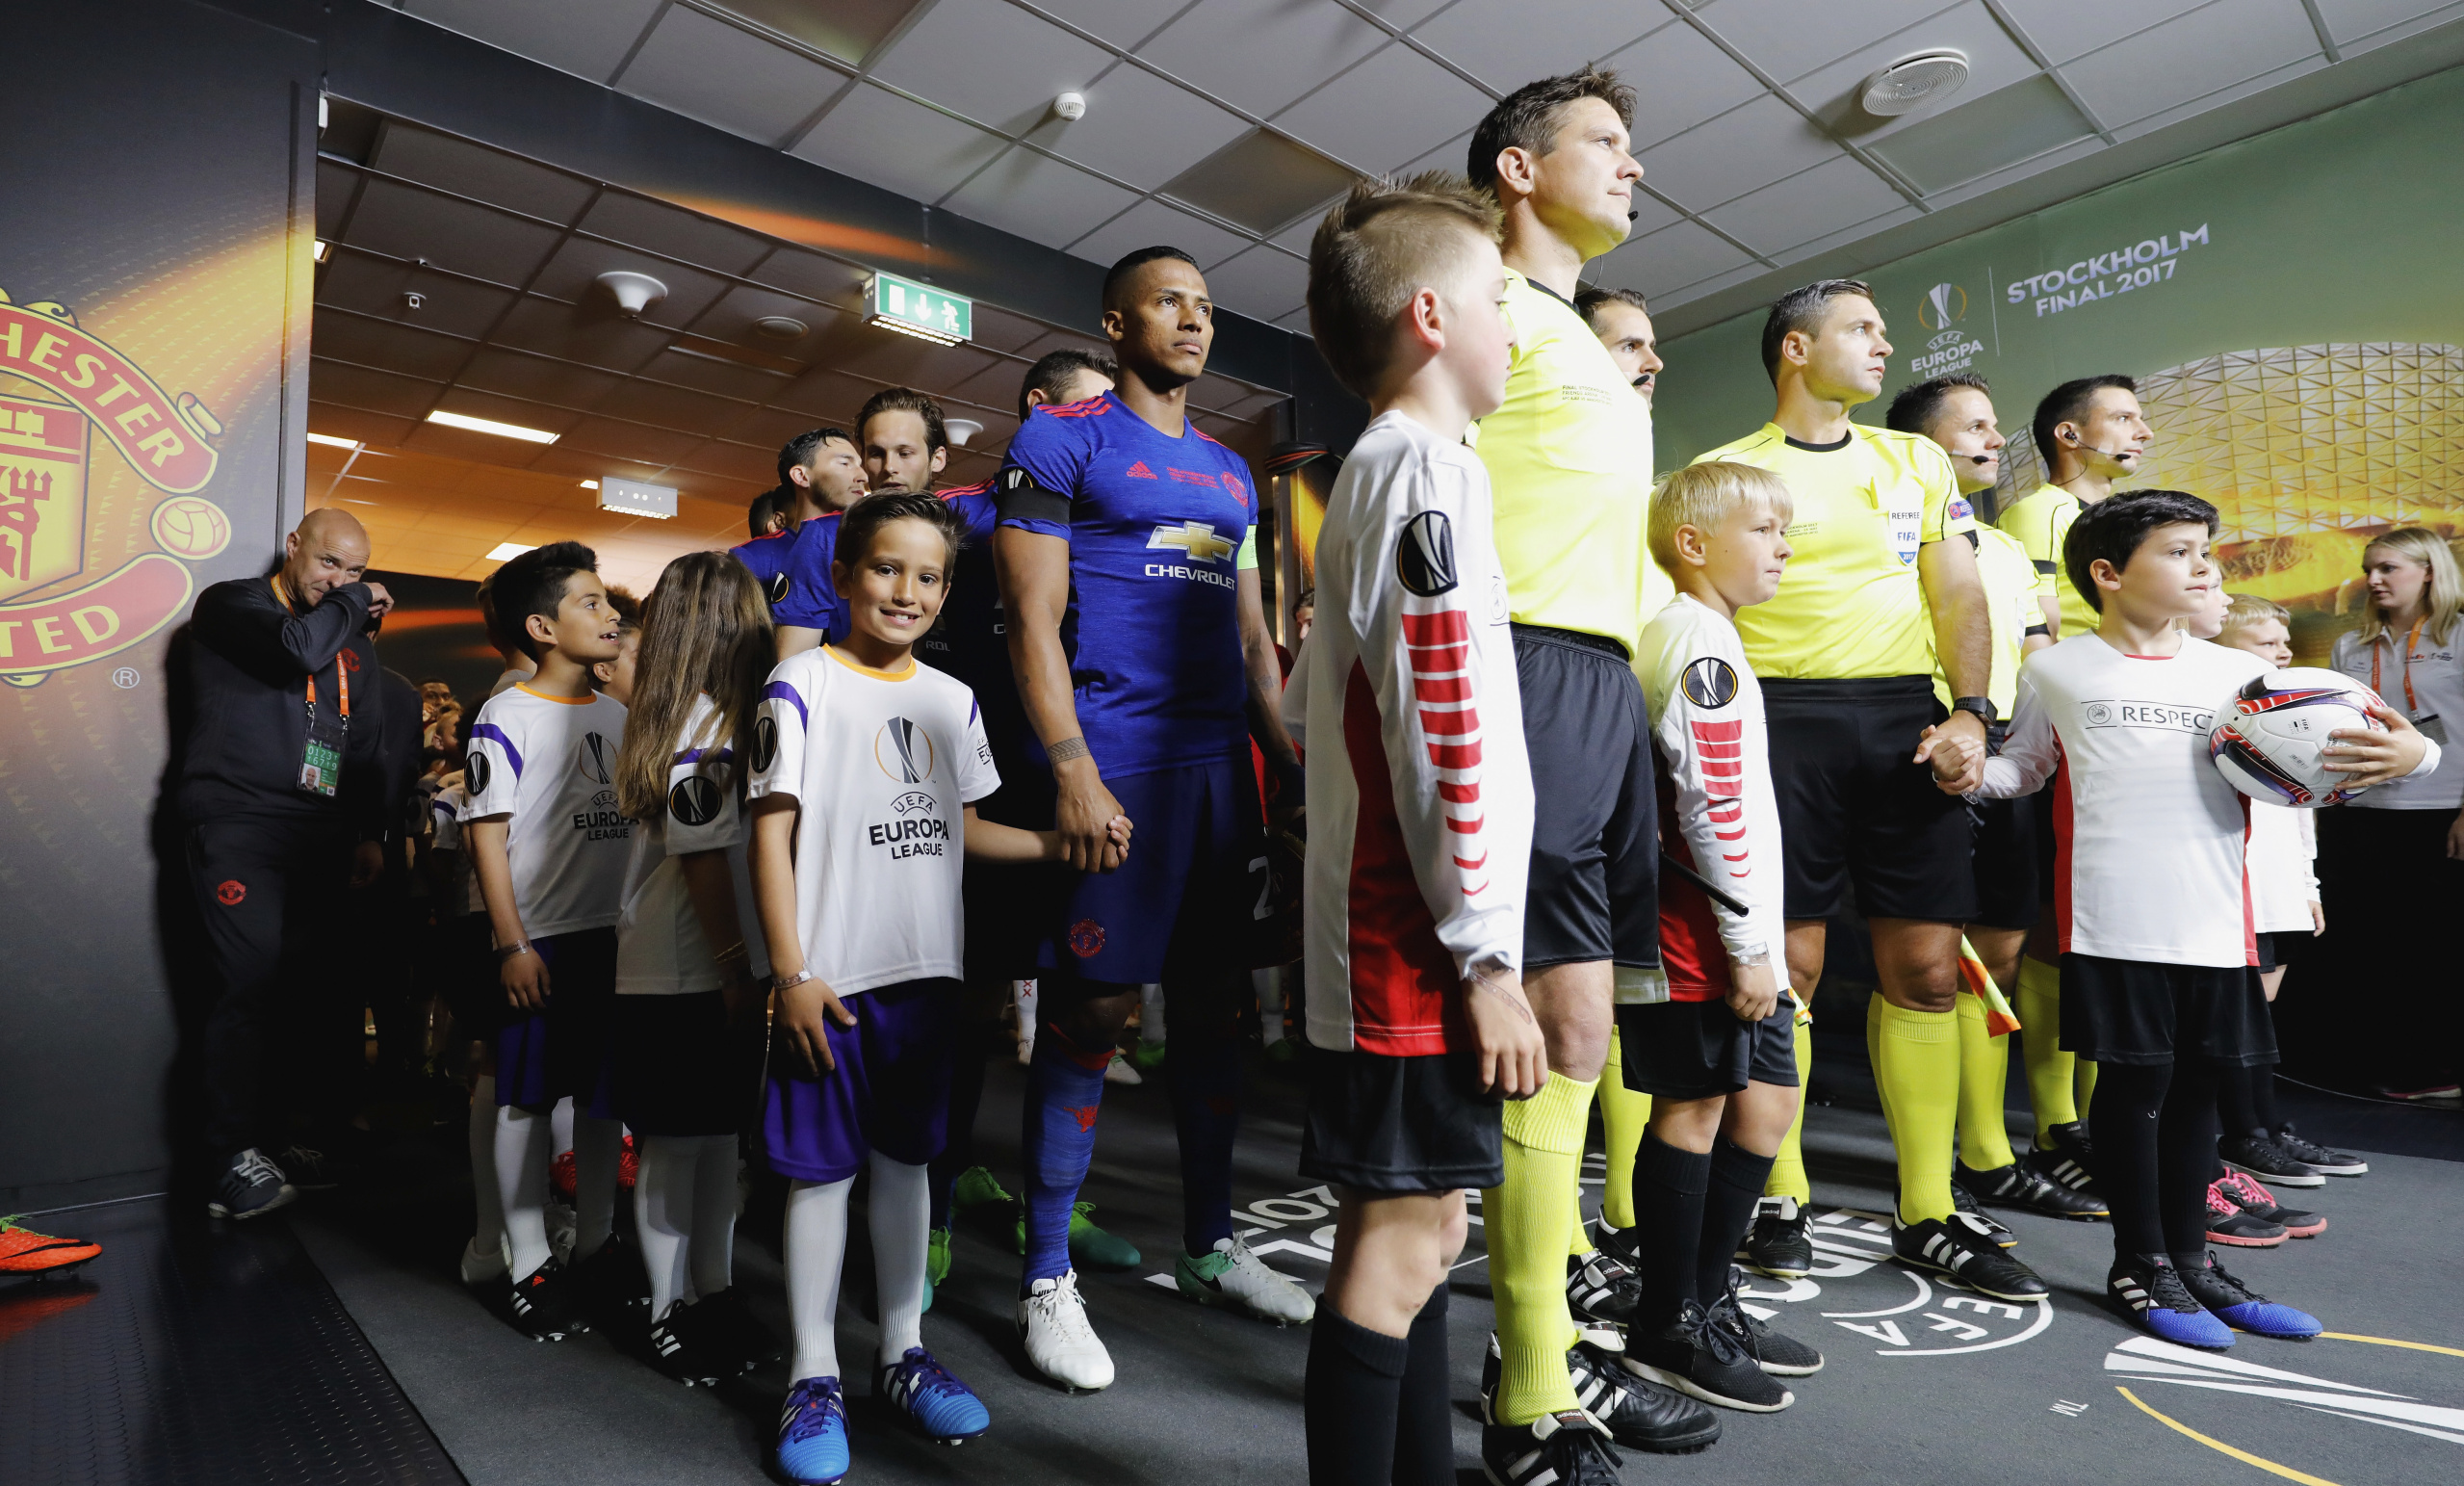 STOCKHOLM, SWEDEN - MAY 24:  The match officials prepare to lead the two teams out prior to the UEFA Europa League Final between Ajax and Manchester United at Friends Arena on May 24, 2017 in Stockholm, Sweden.  (Photo by Simon Hofmann - UEFA/UEFA via Getty Images)